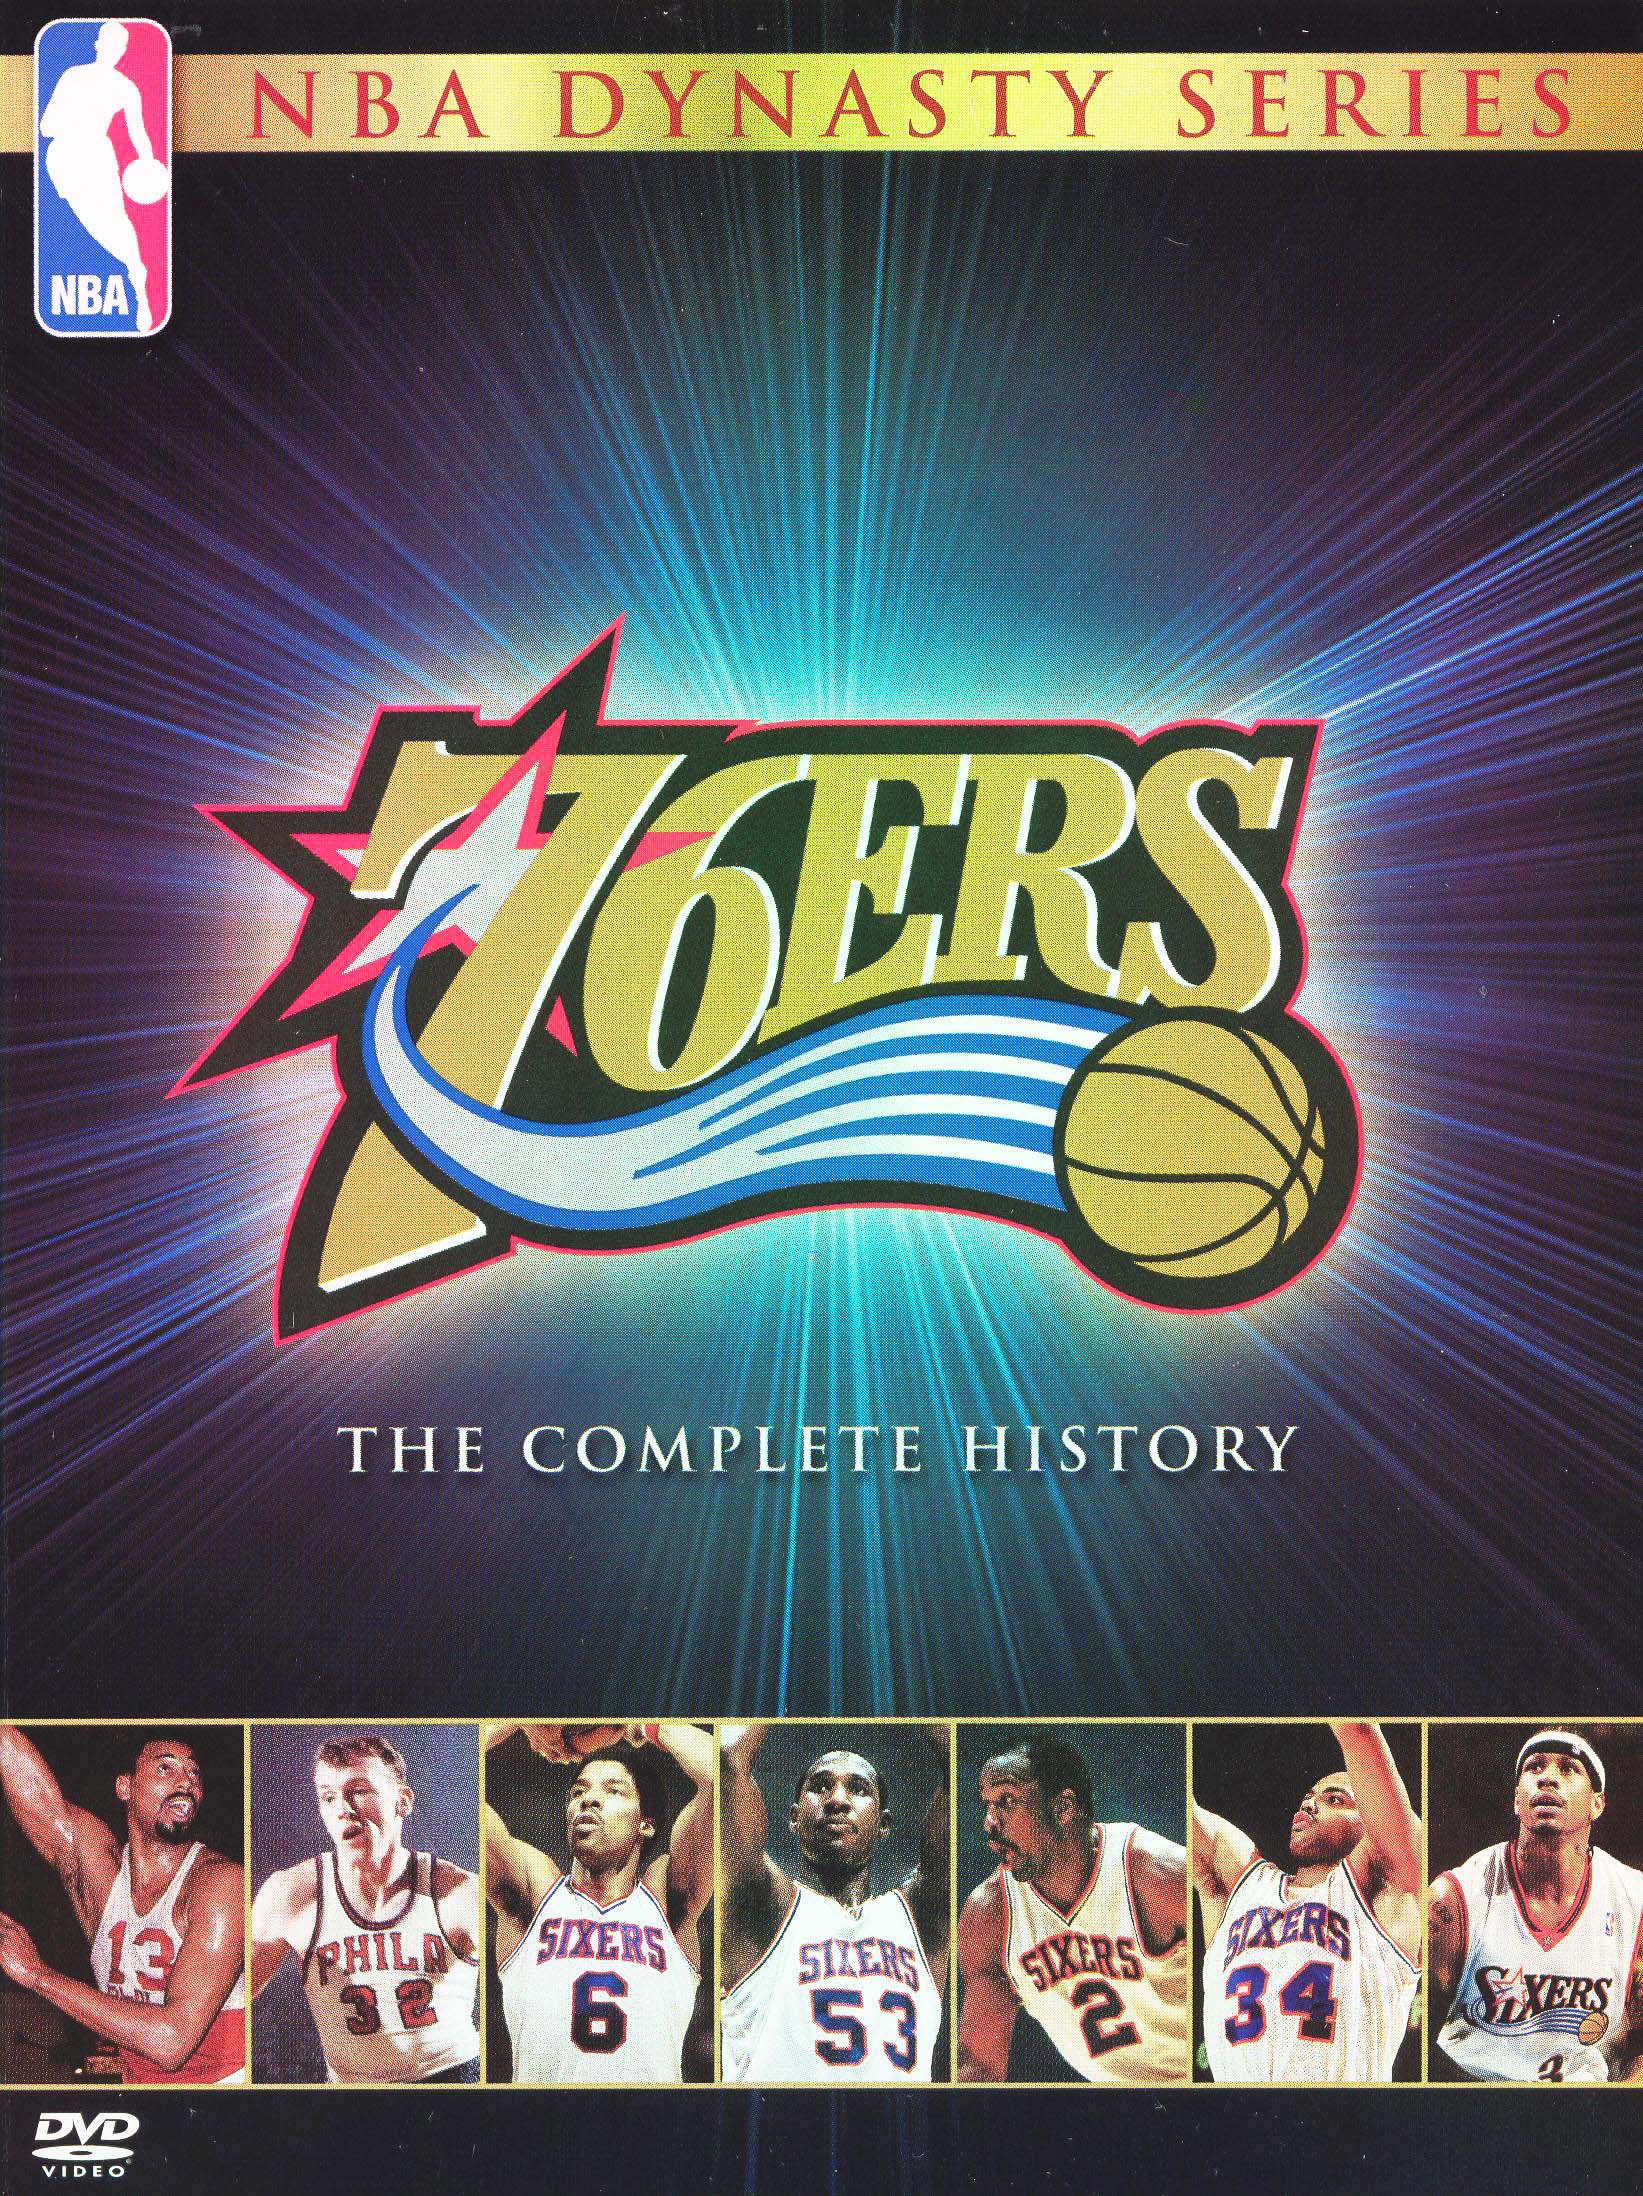  Season of the 76ers: The Story of Wilt Chamberlain and